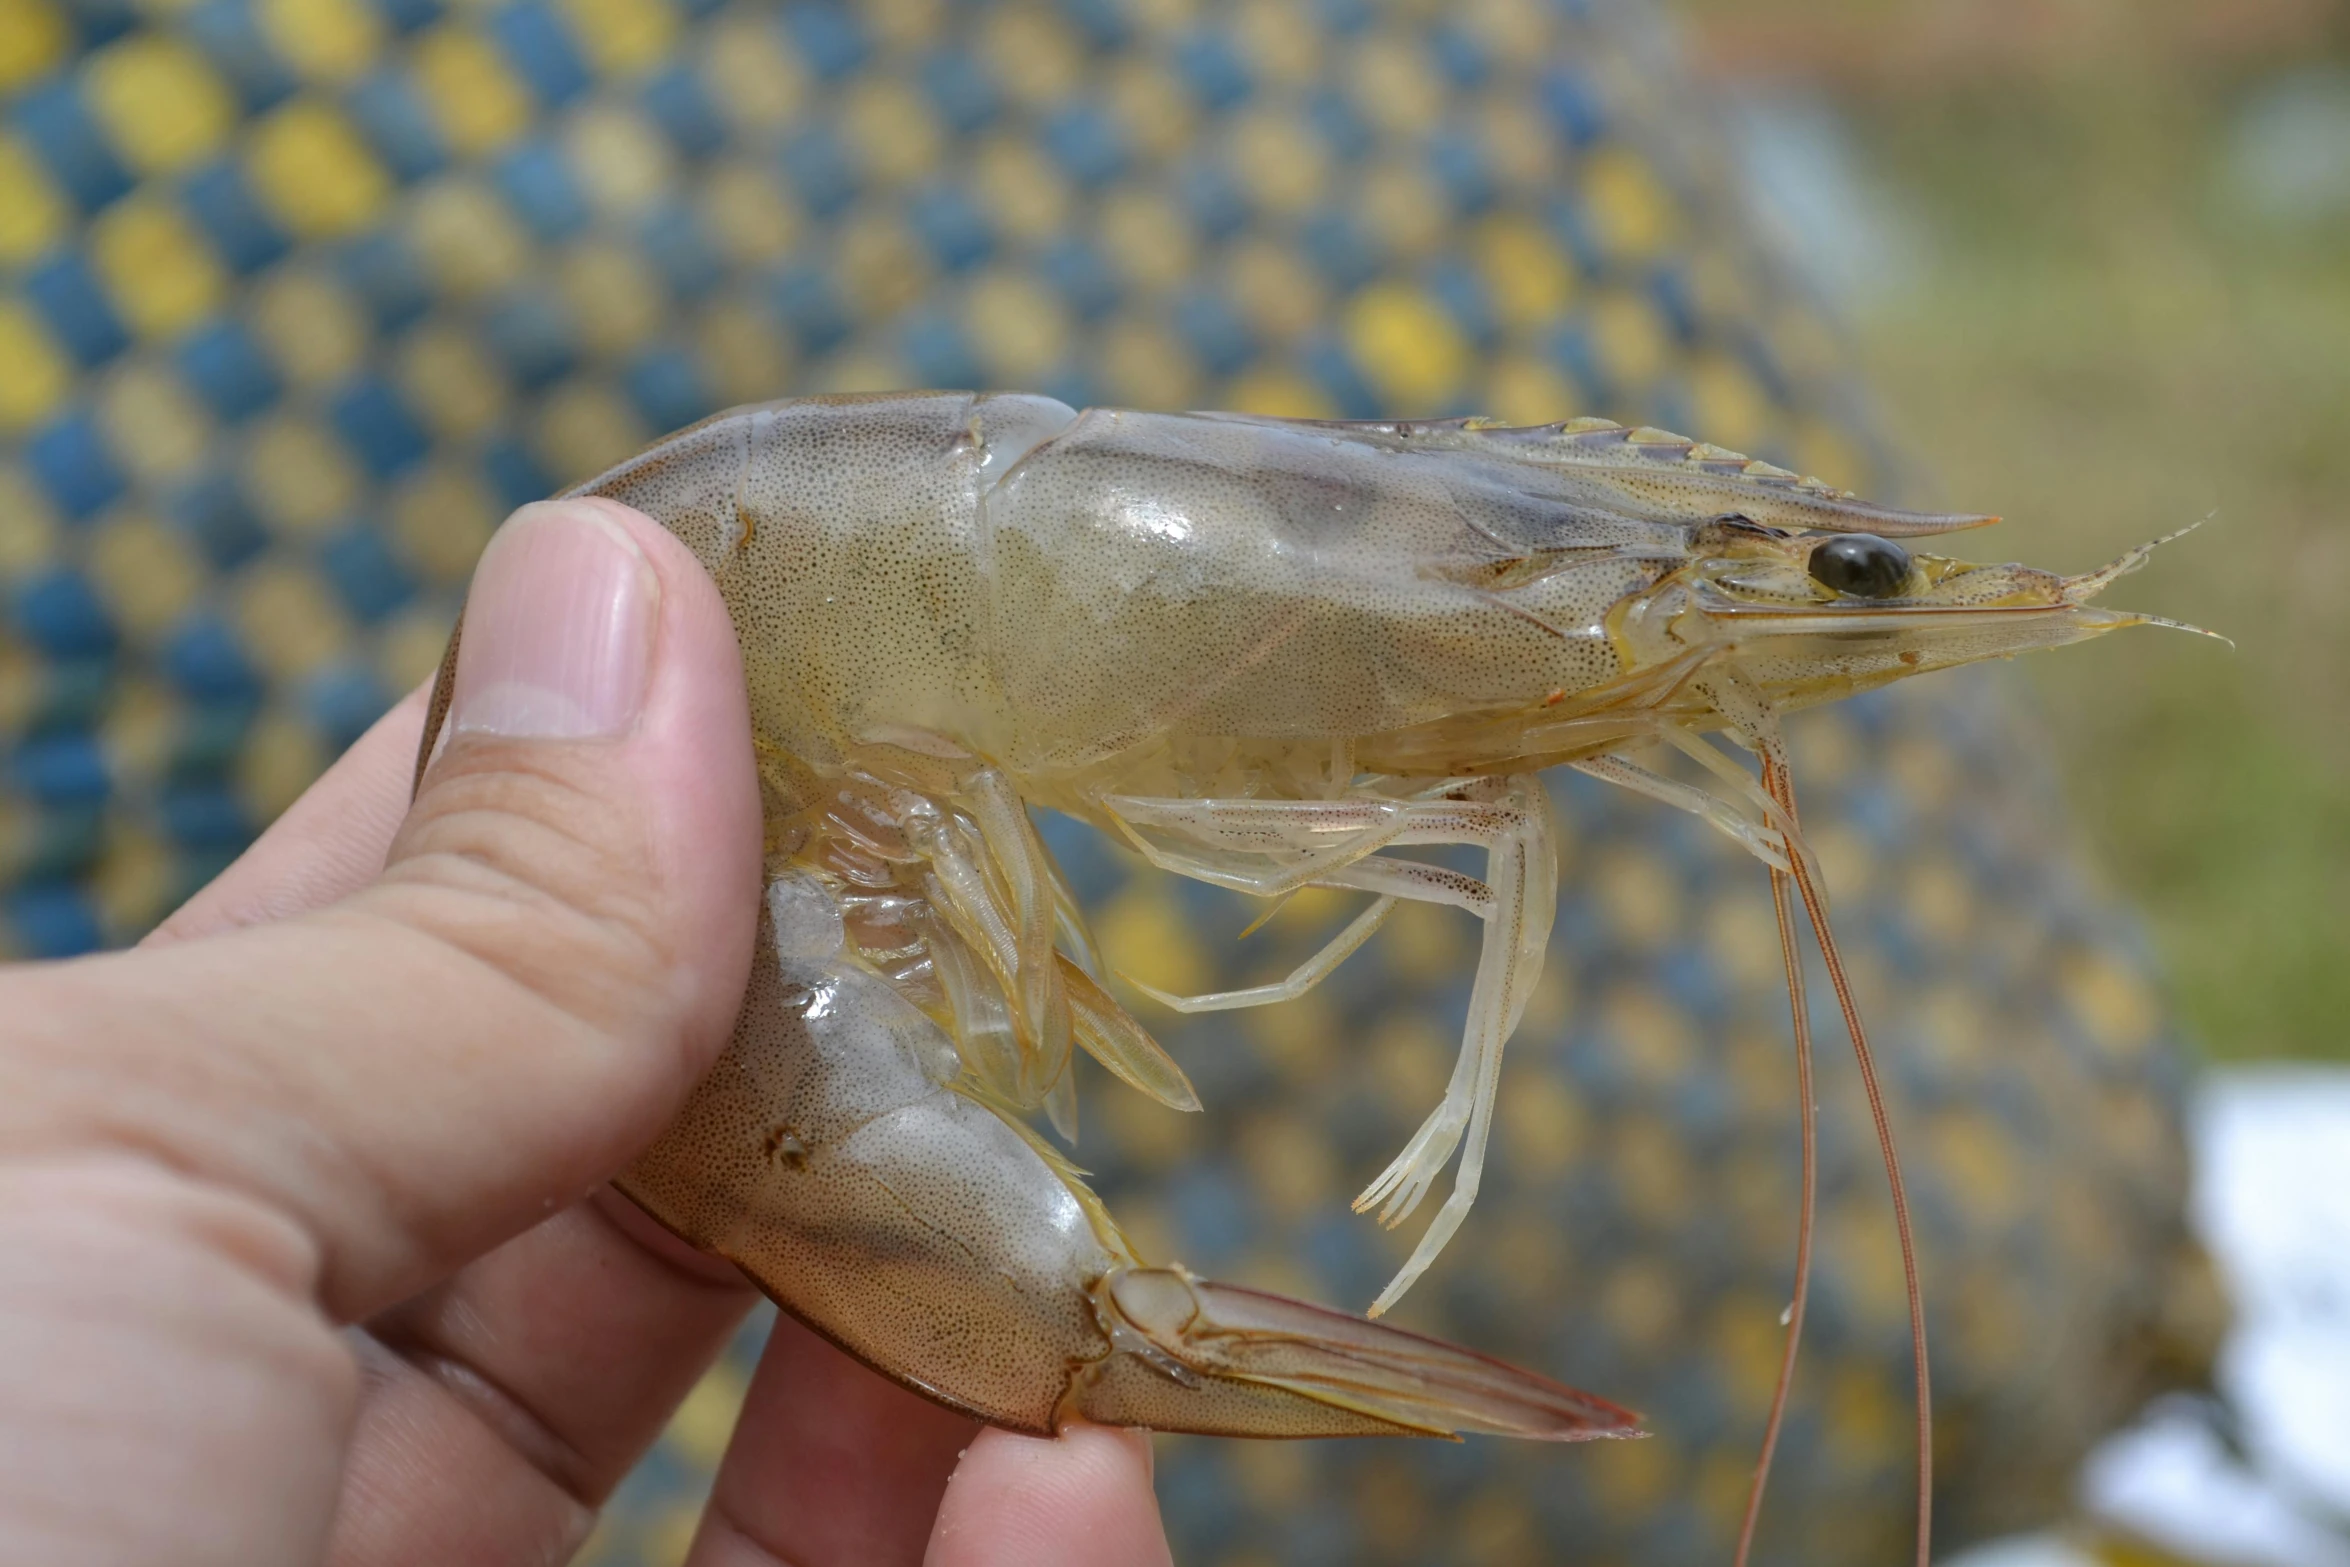 the large shrimp is holding in its right hand